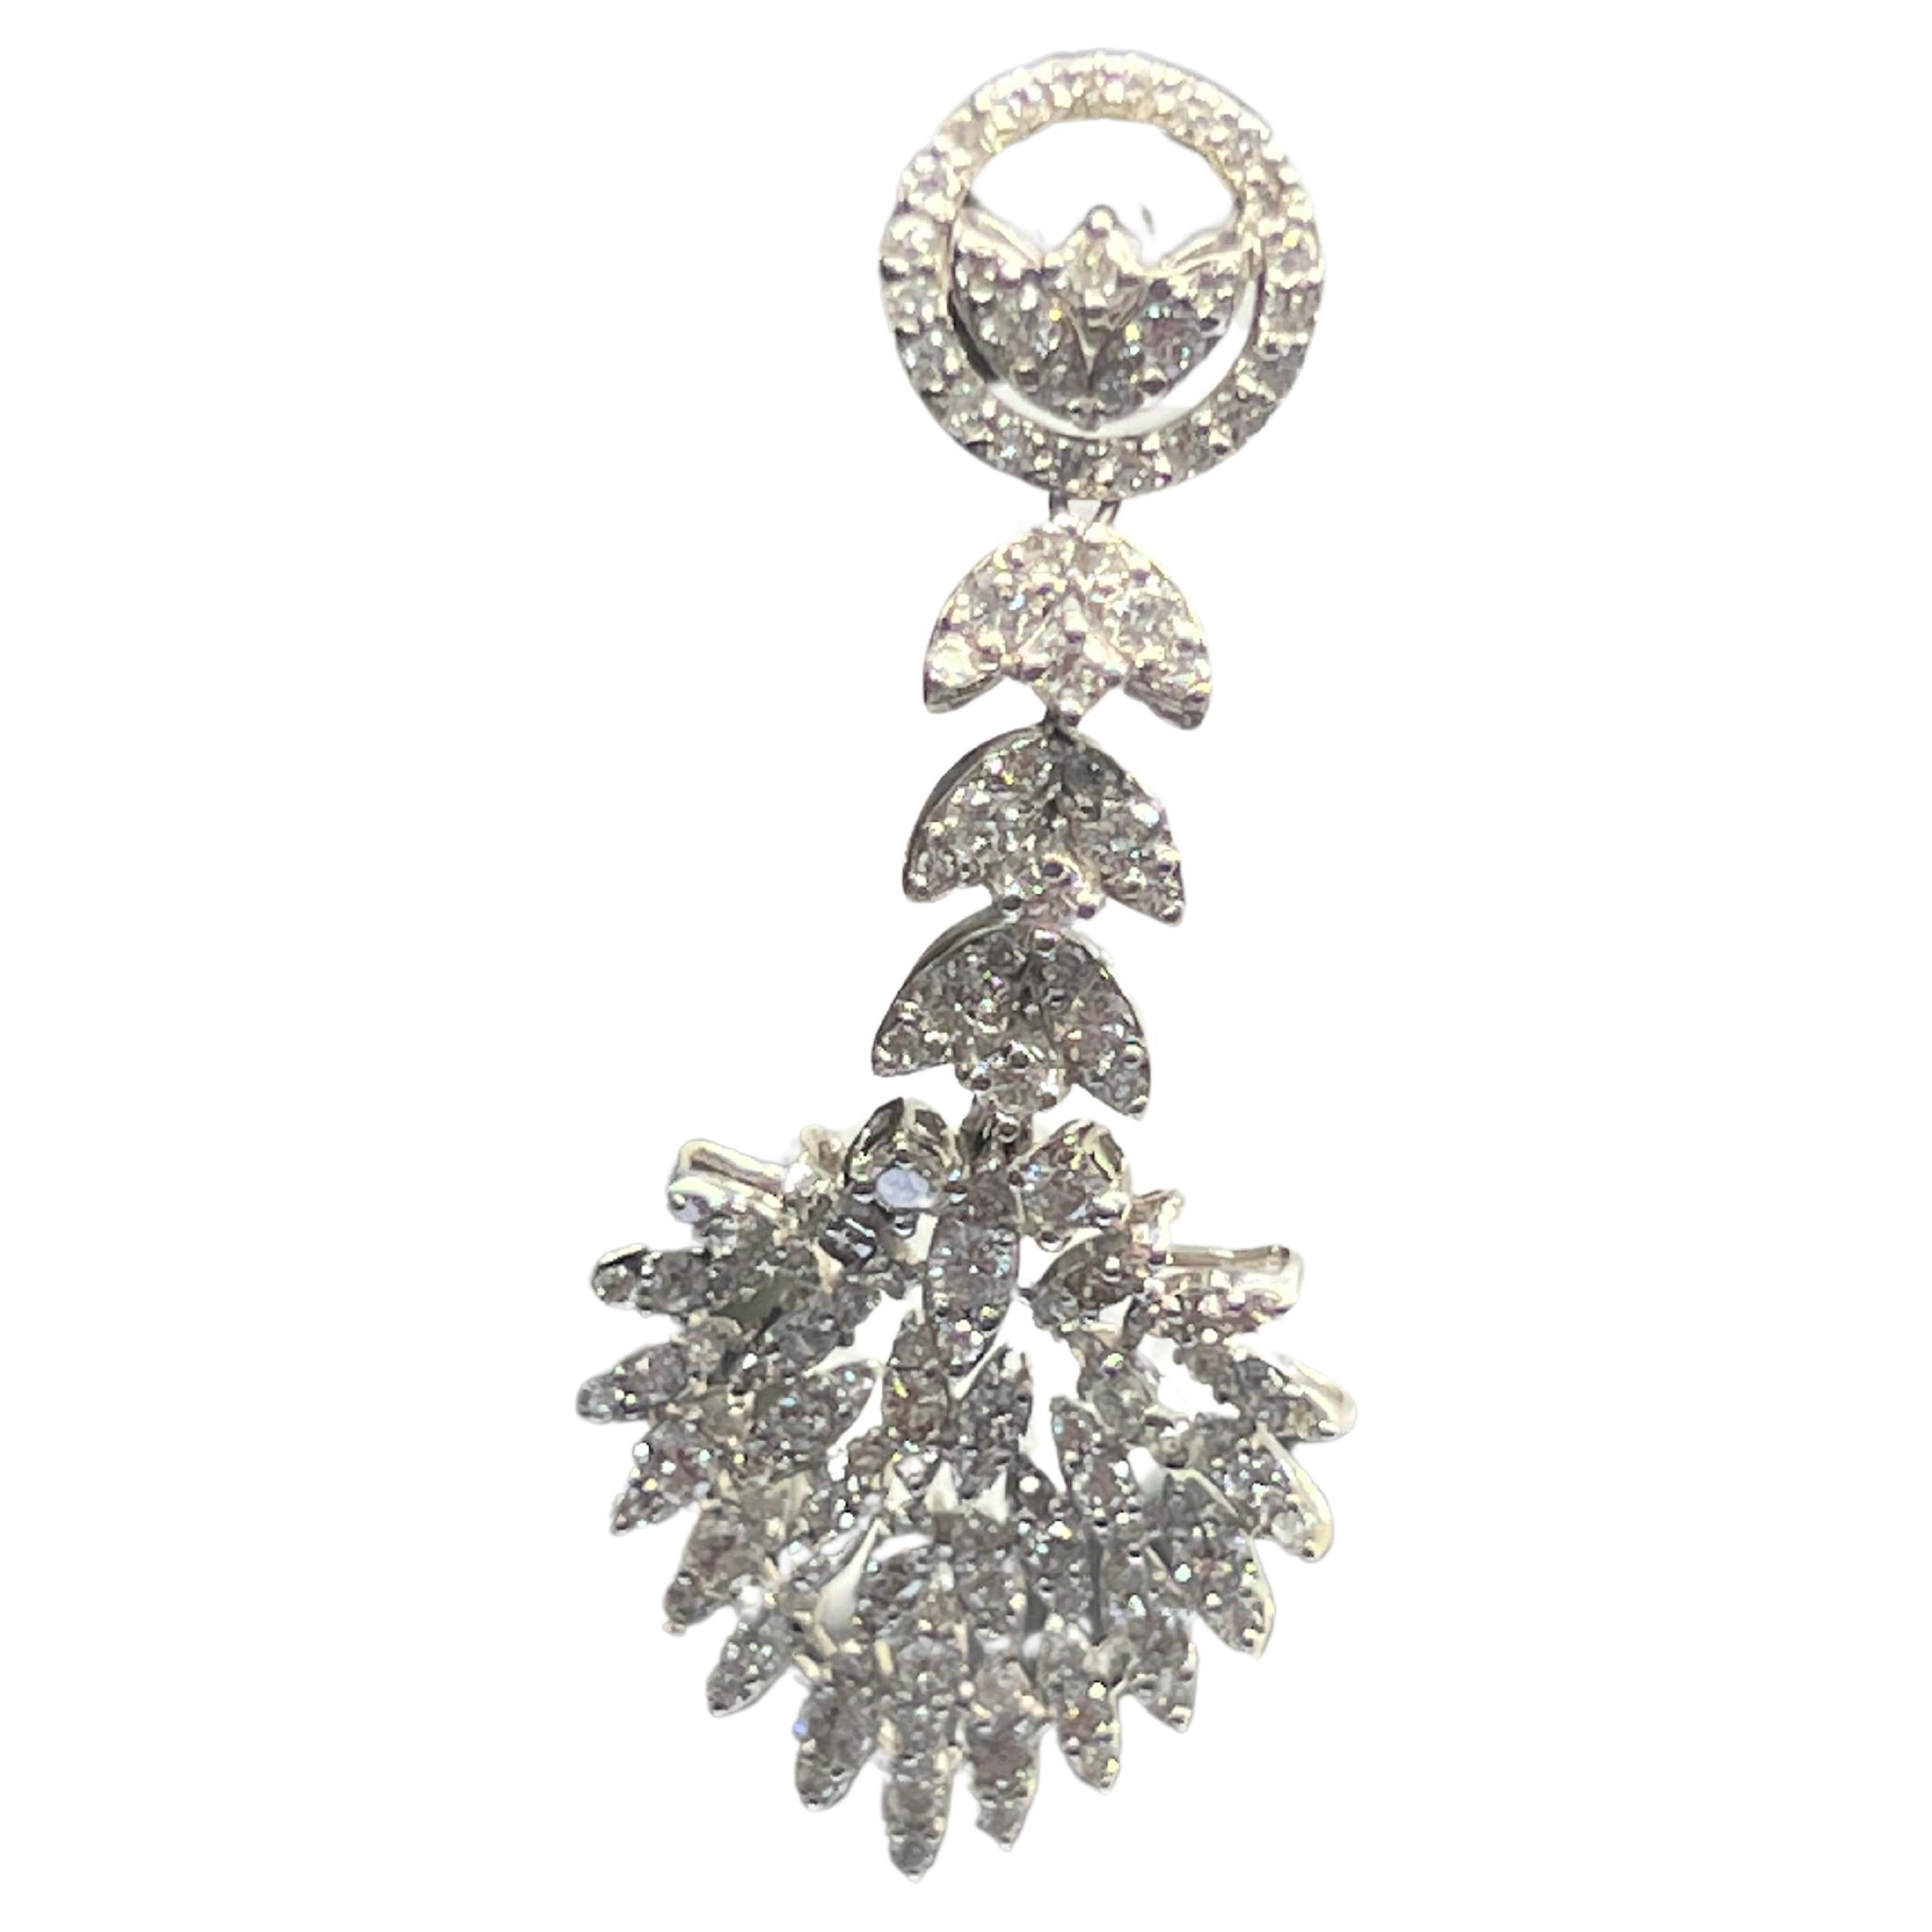 Add a touch of elegance to your look with these 14k White Gold Diamond Drop Flower Dangle Earrings. Crafted with natural, round-shaped diamonds in a beautiful flower shape, these earrings are sure to catch the eye. The delicate dangle/drop style